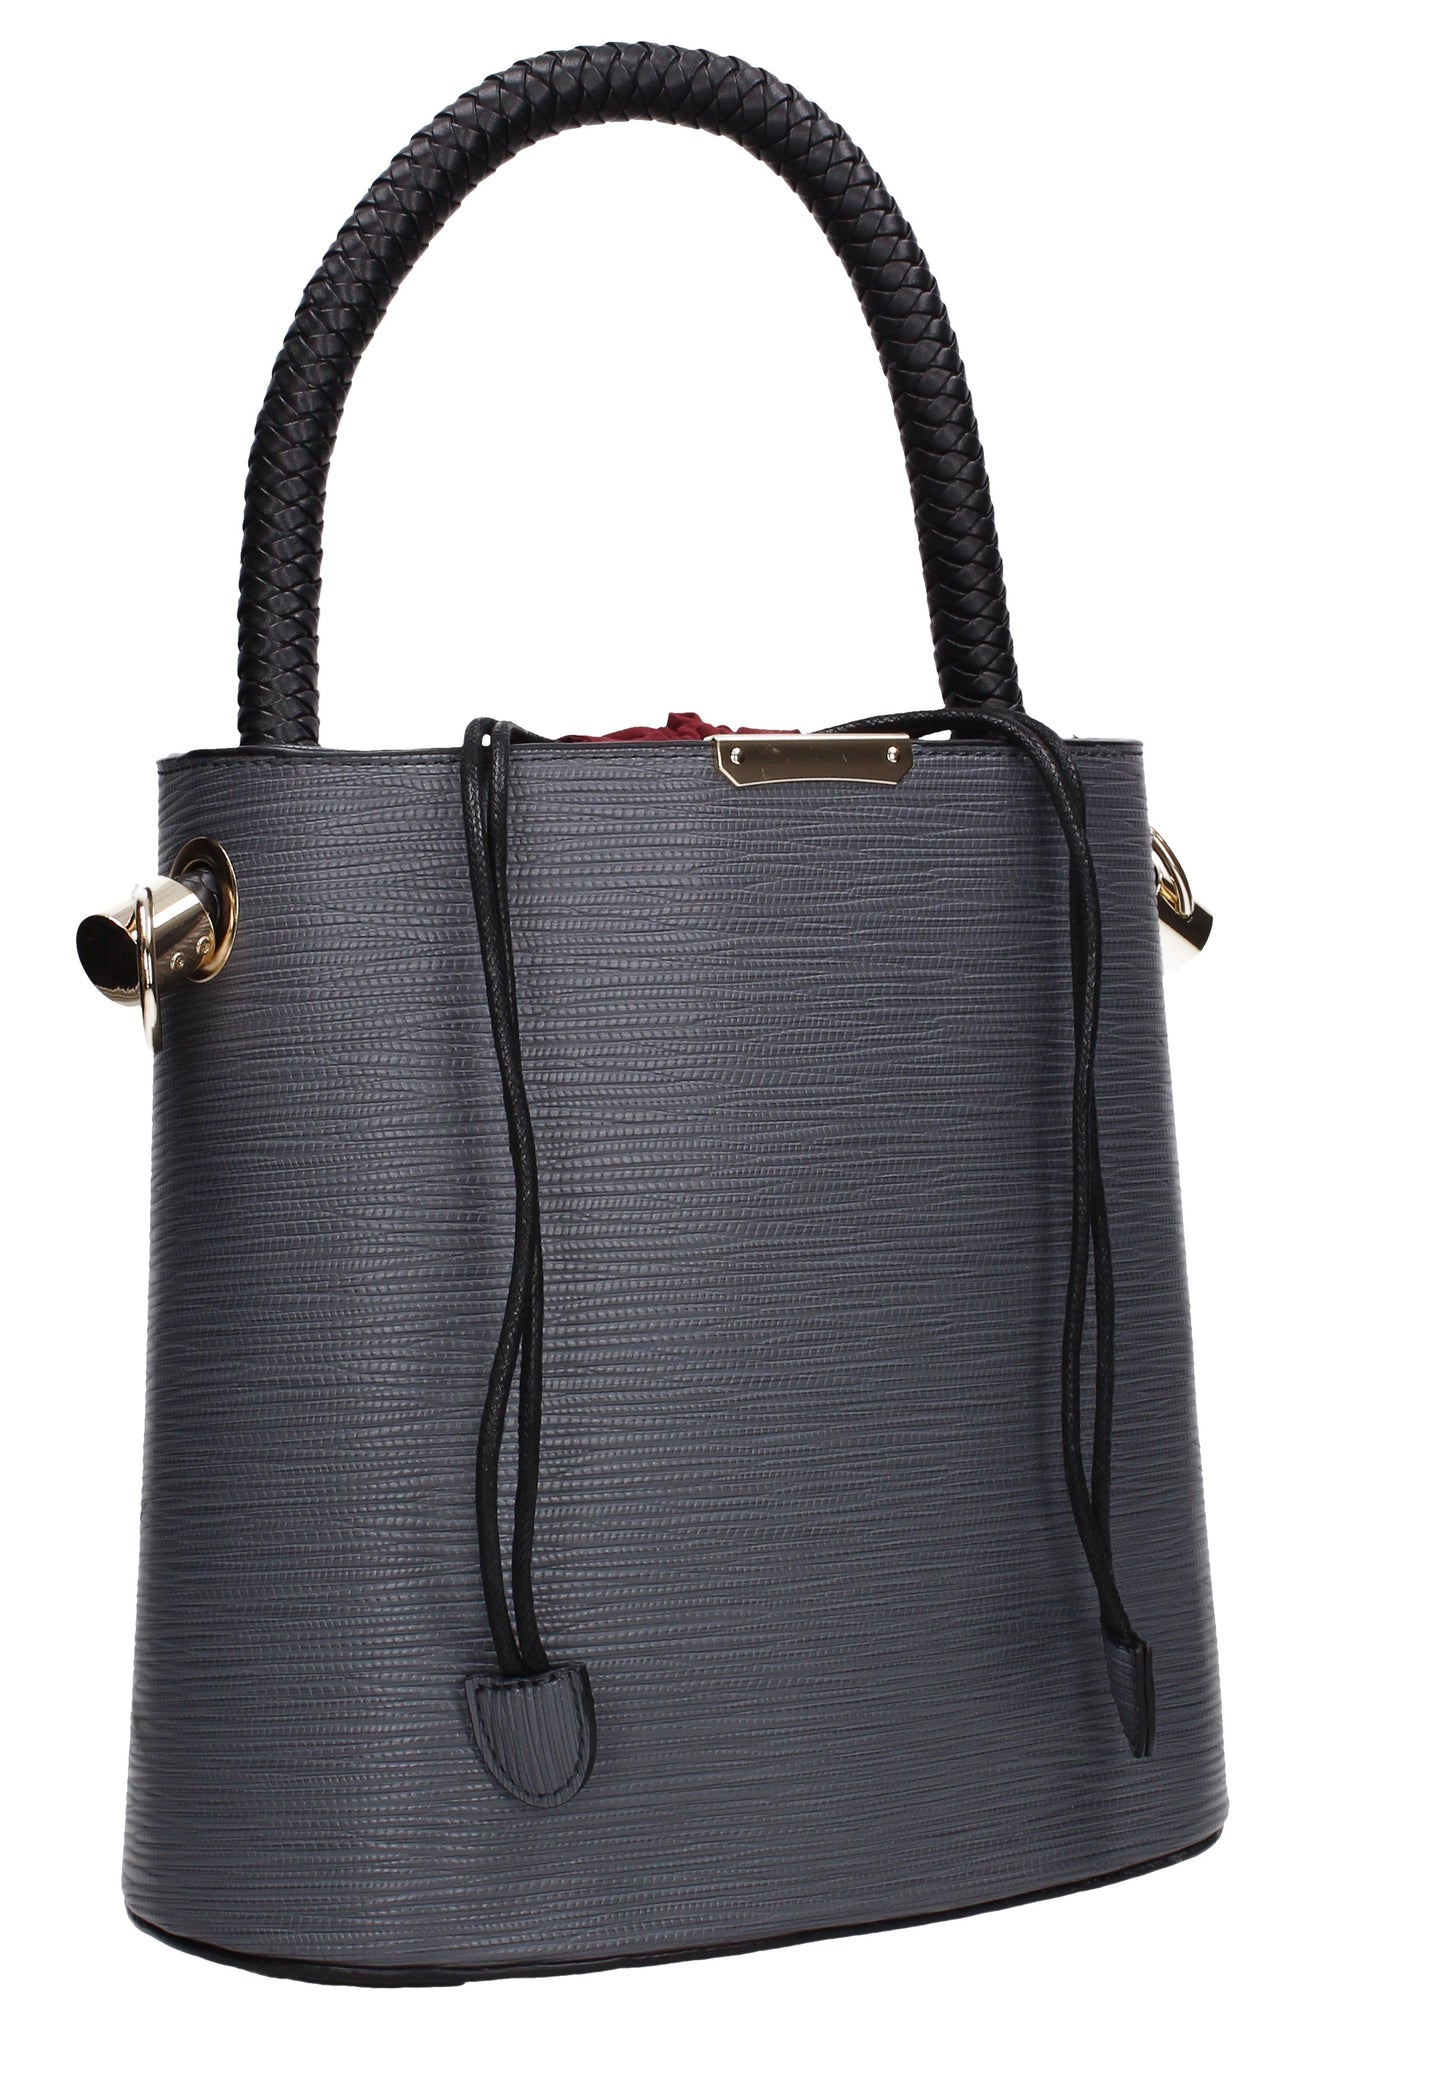 Buy your Eden Handbag Grey Today! Buy with confidence from Swankyswans